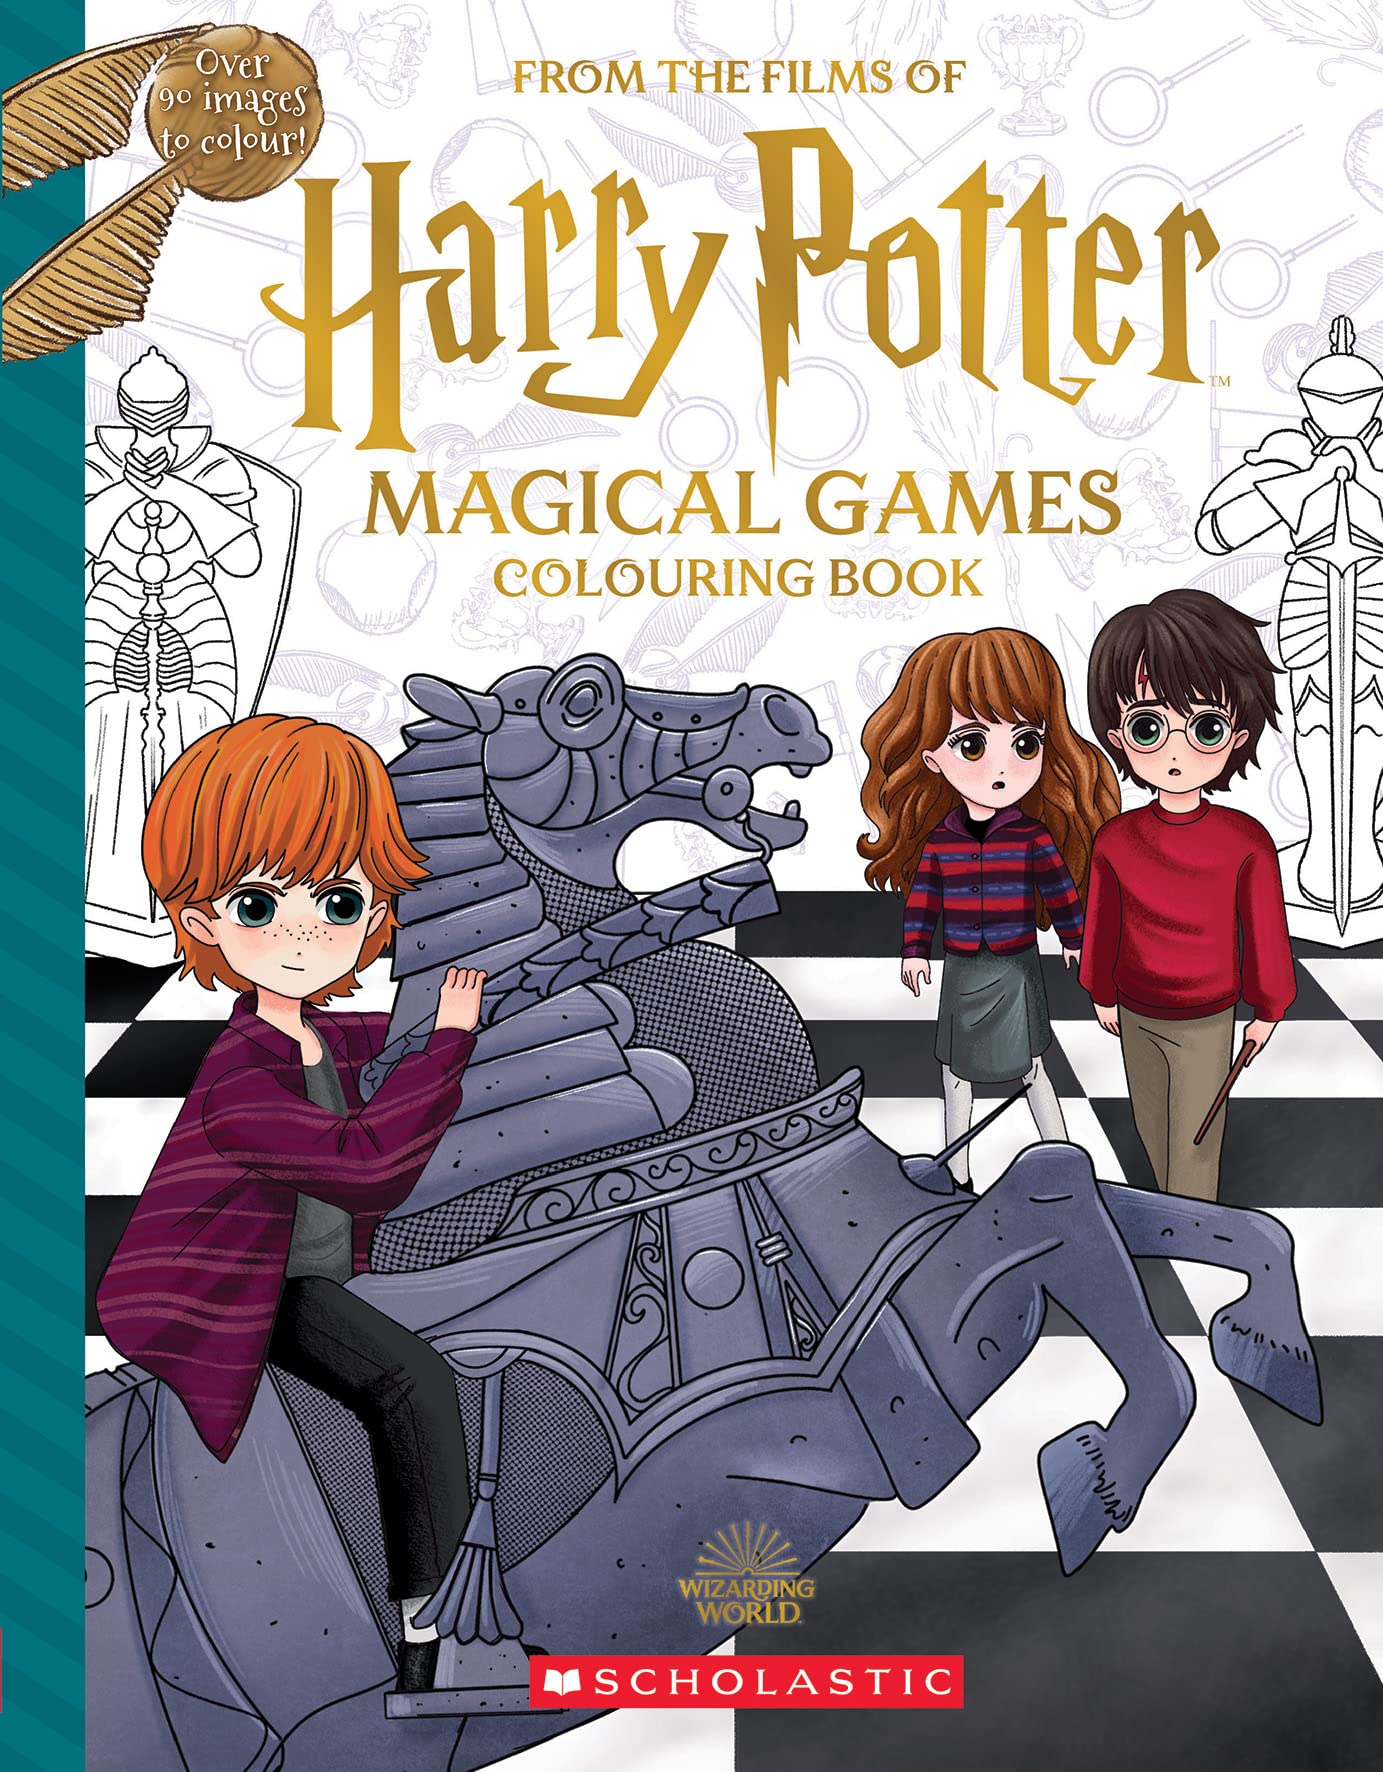 Harry Potter: Magical Games Colouring Book